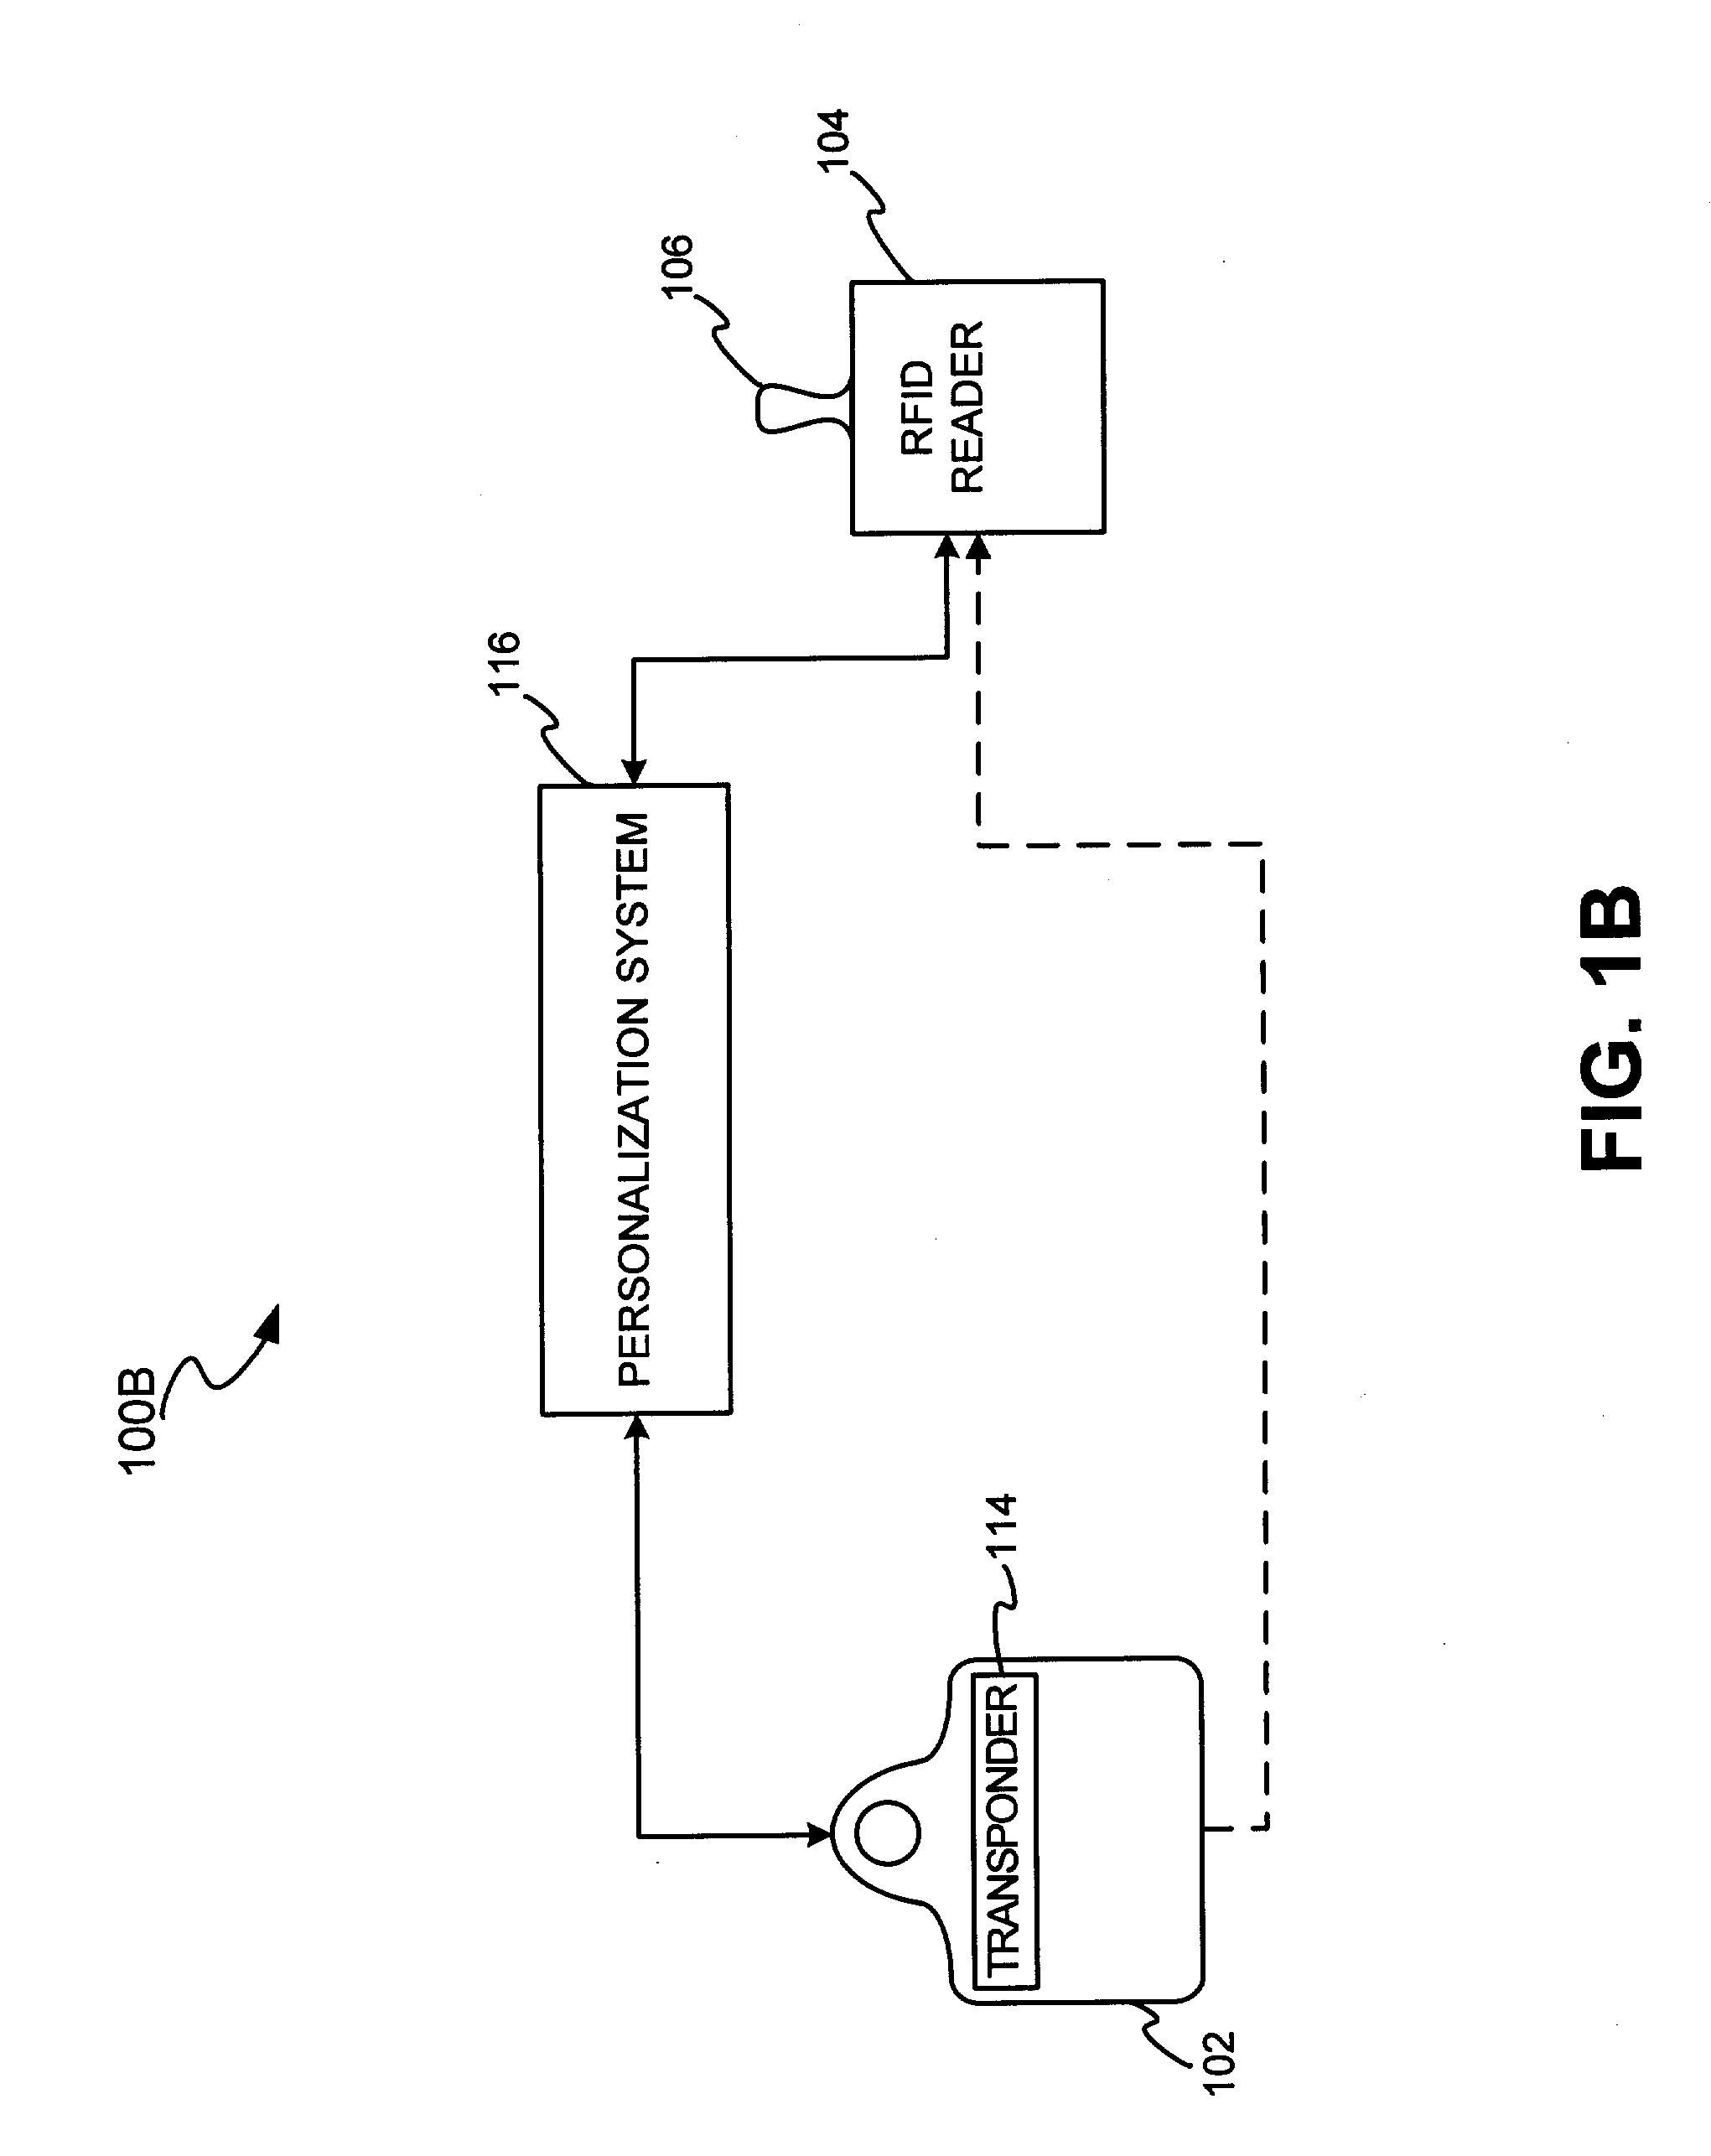 Method and system for a travel-related multi-function fob